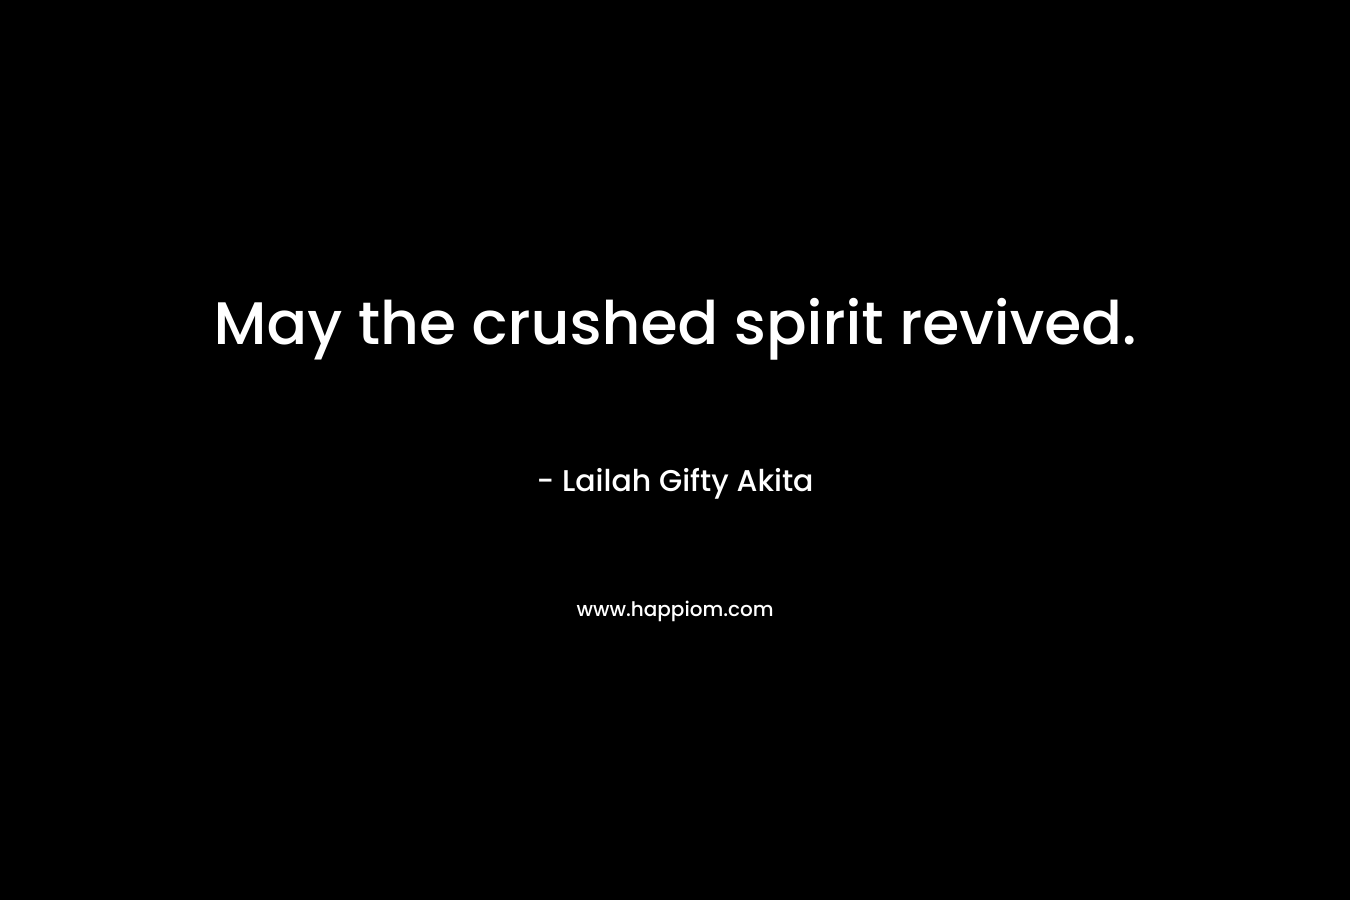 May the crushed spirit revived.